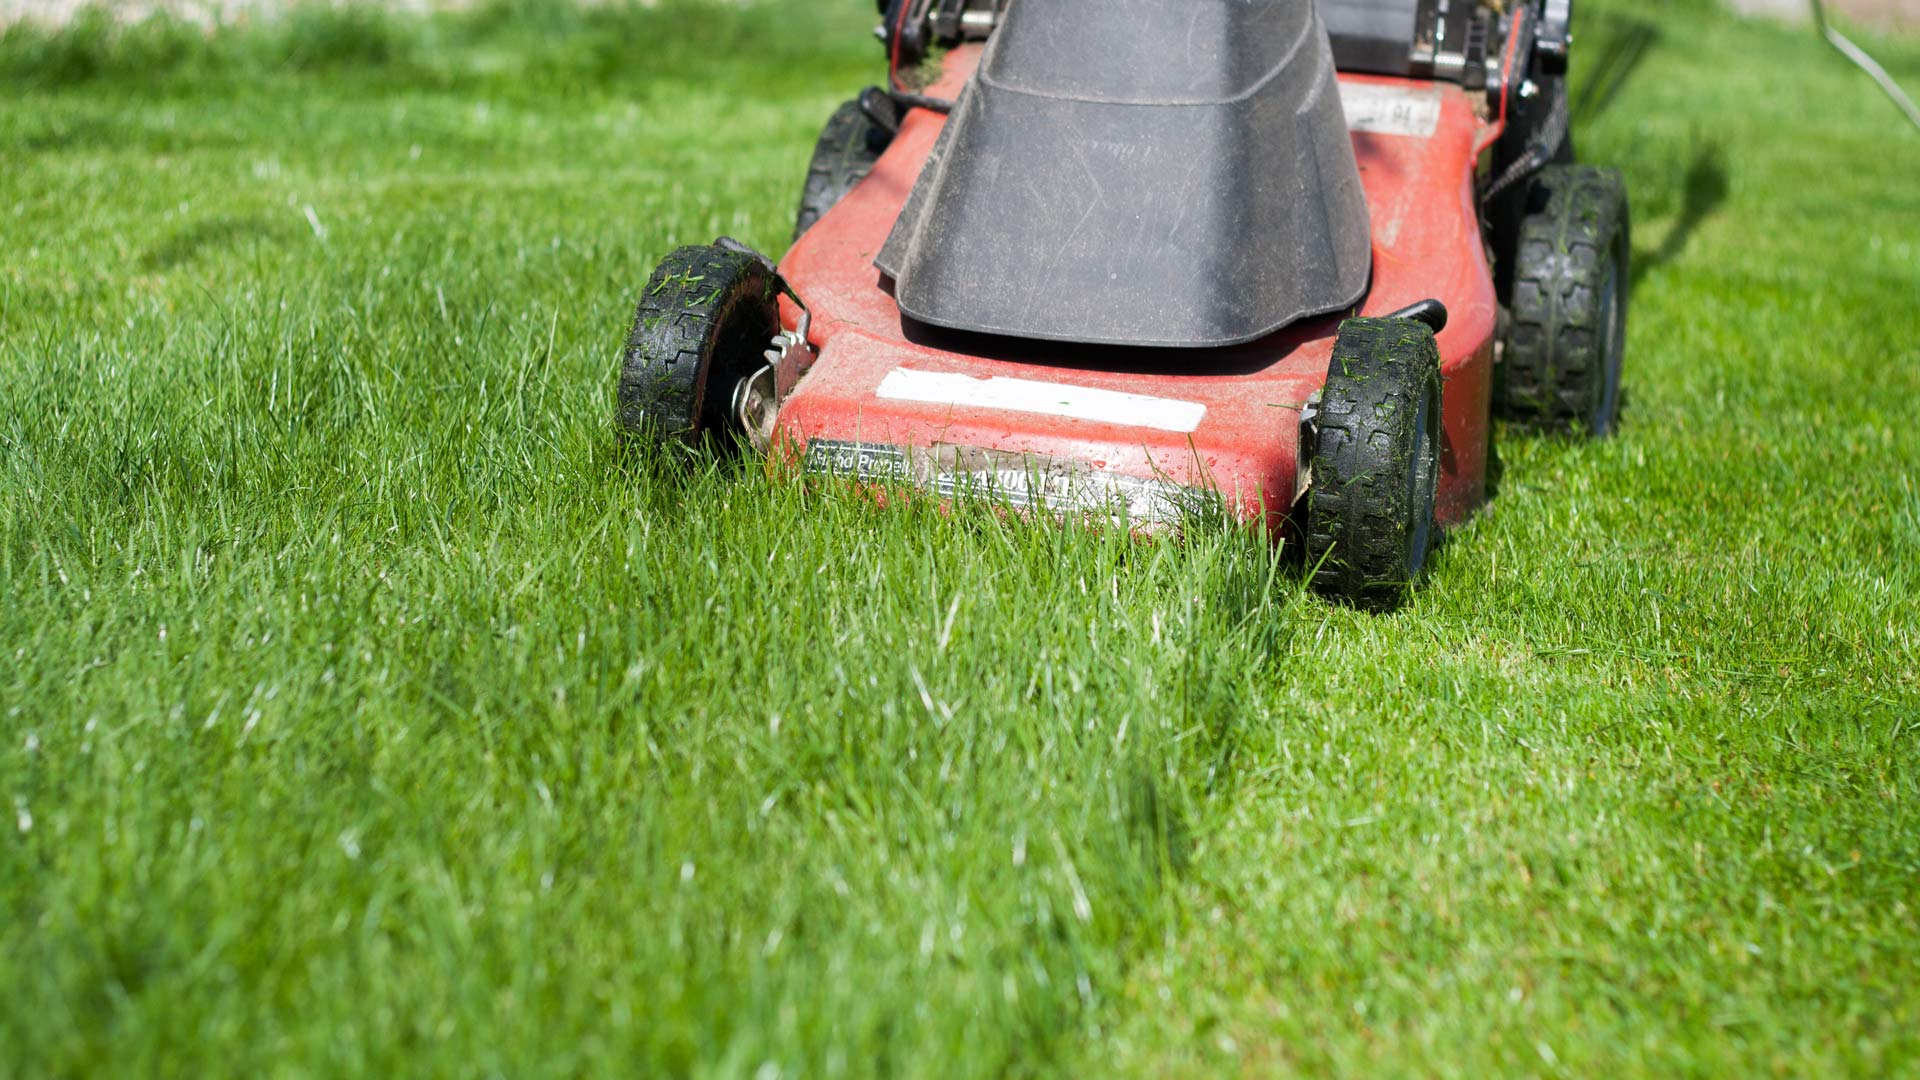 Don’t Make These Common Mistakes When Mowing Your Lawn!